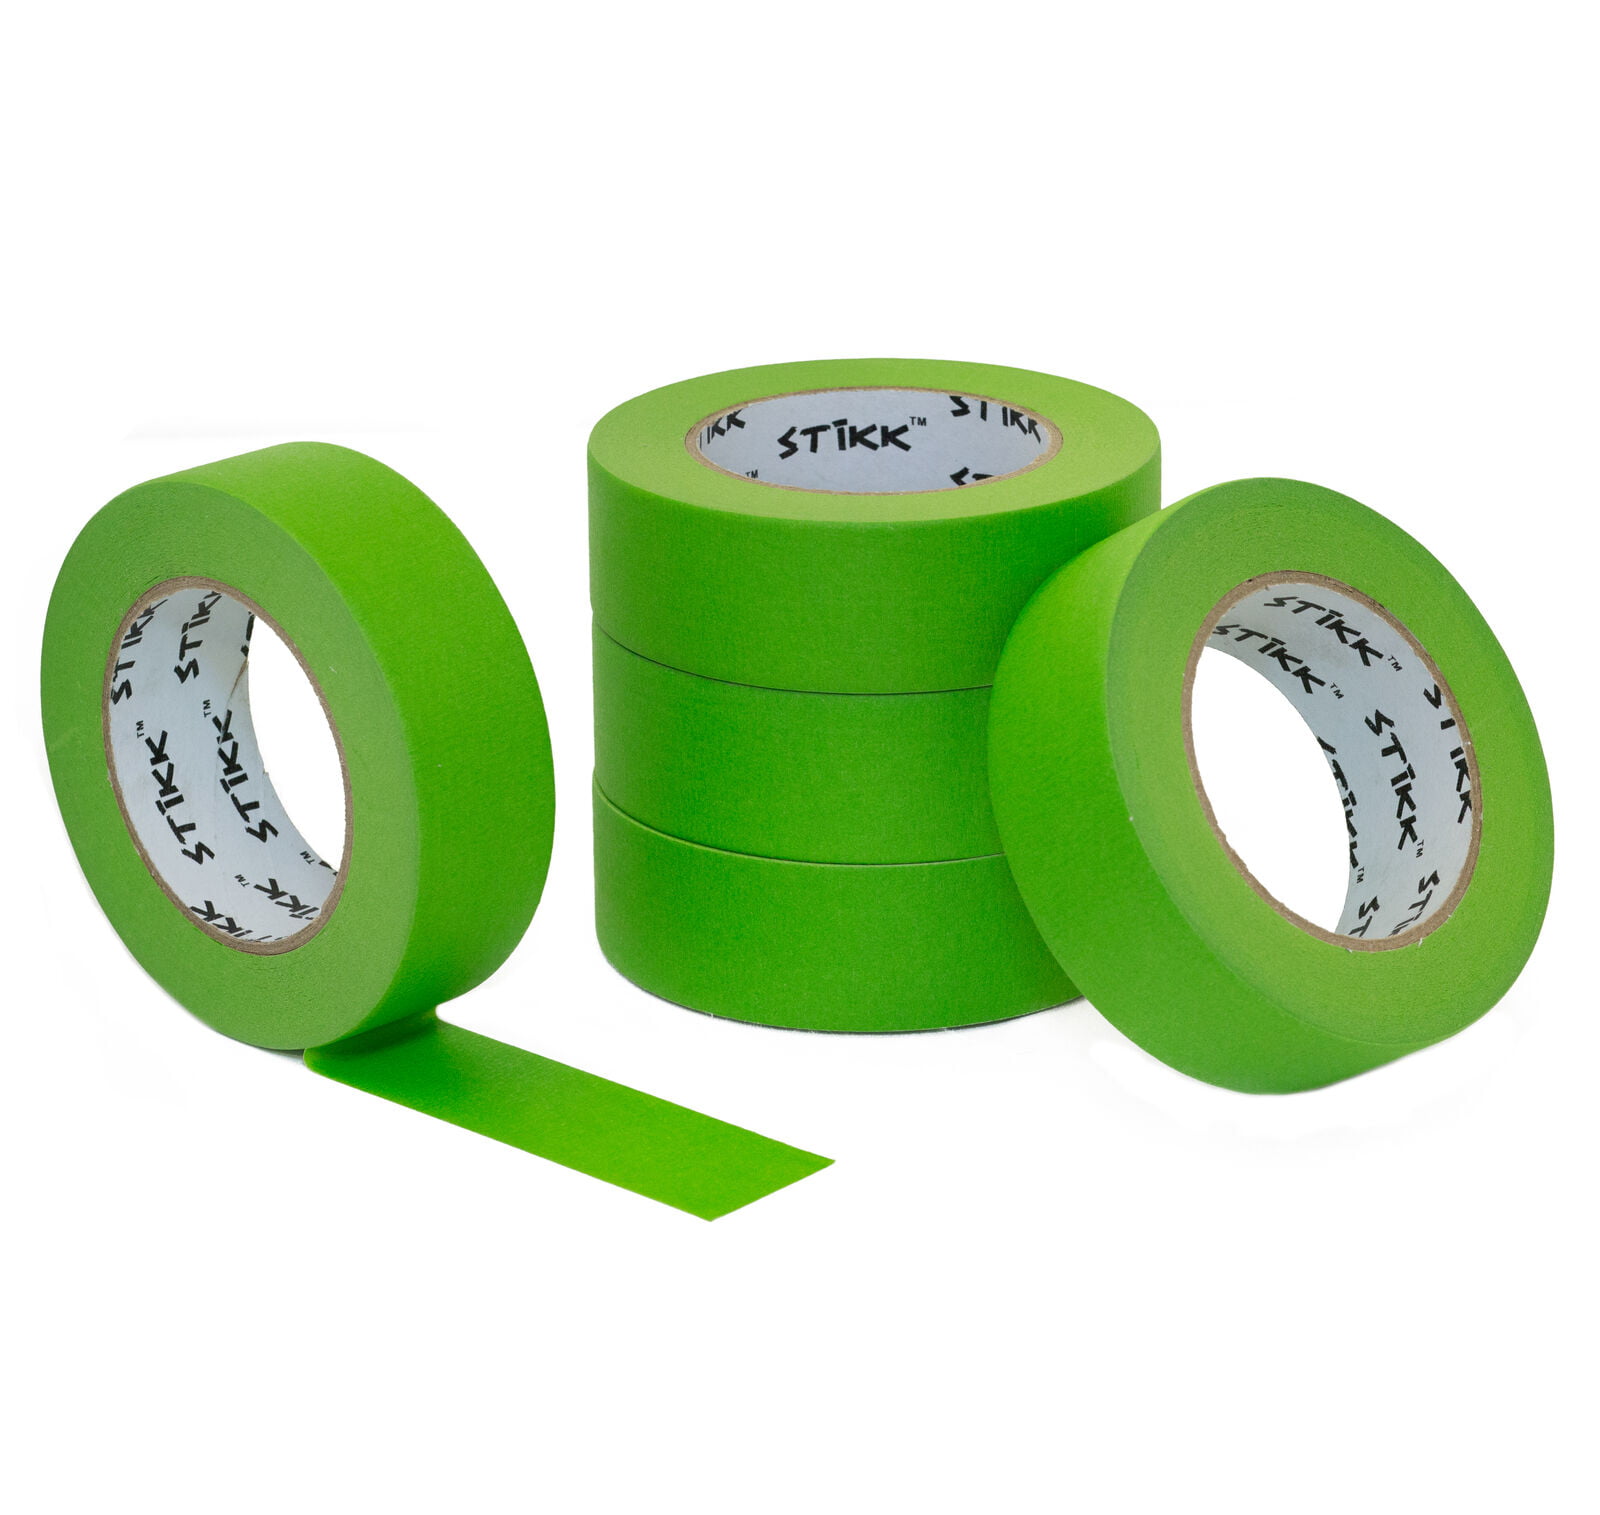 3 Pack 3 Pack 1 x 60 Yard STIKK Blue Painters Tape 14 Day Clean Release Trim Edge Finishing Tape .94 in 24MM